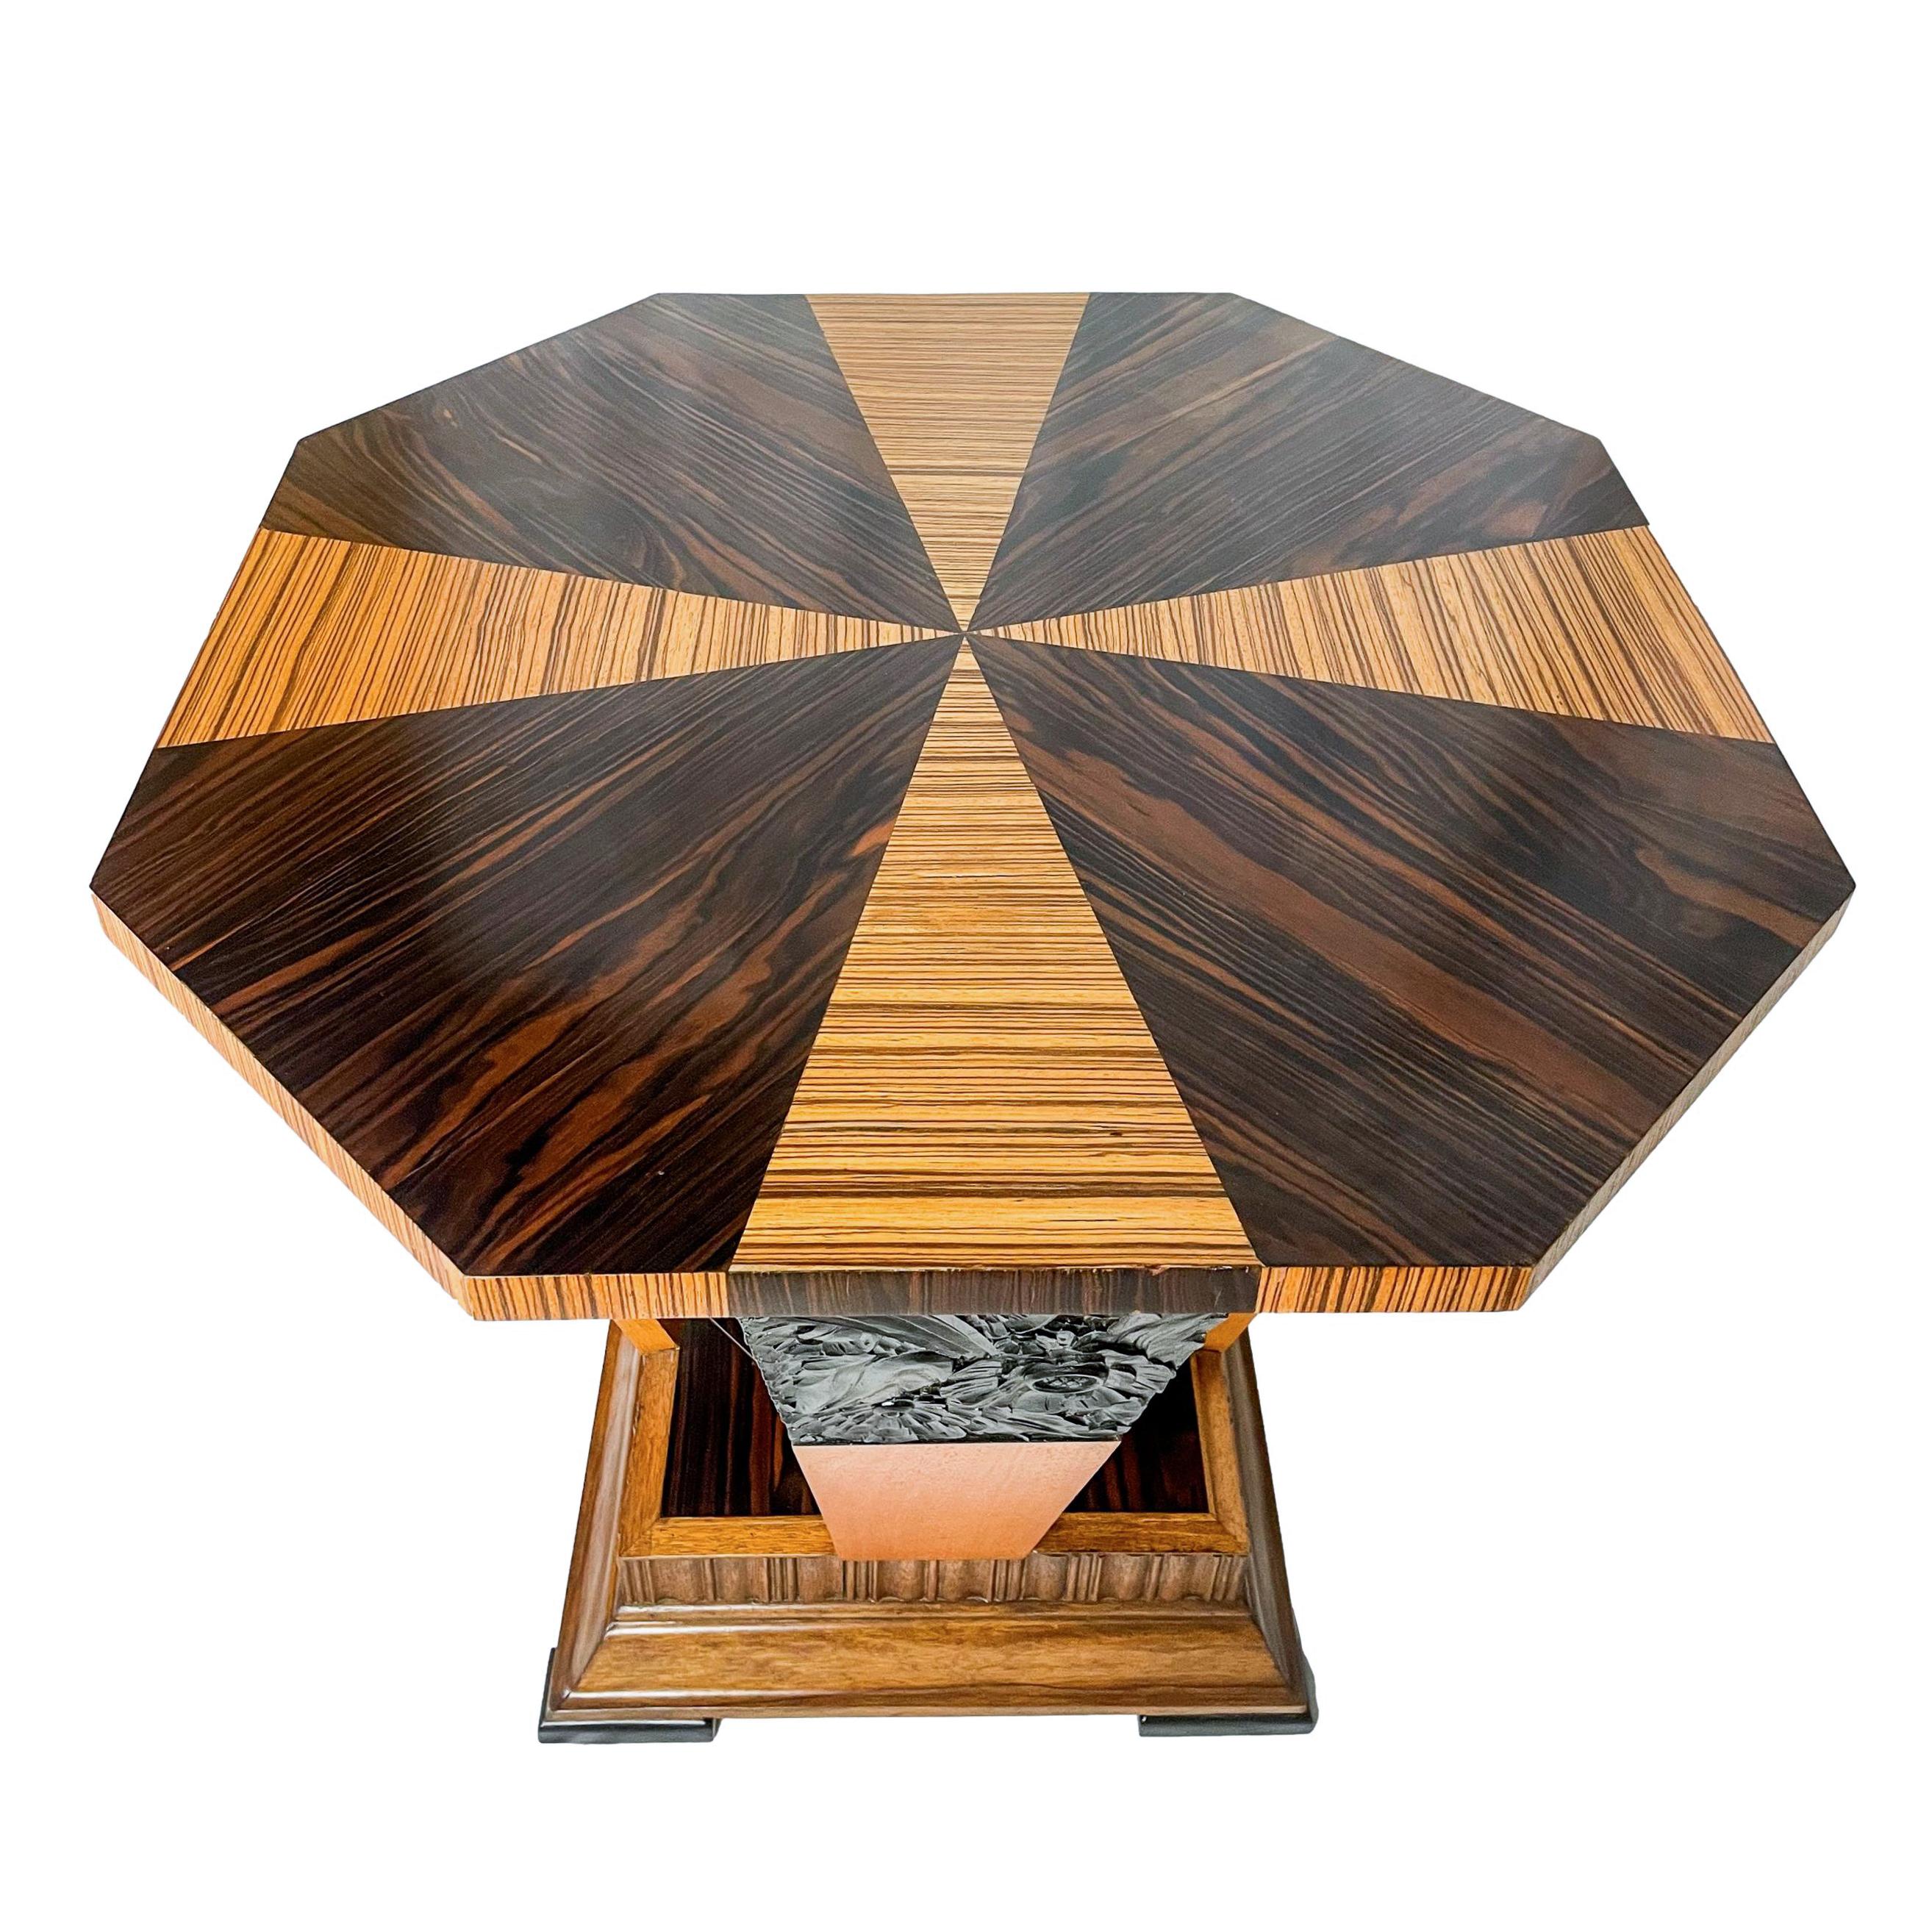 Hand-Crafted Hollywood Regency Art Deco Rosewood and Macassar Octagonal Center Table, c. 1930